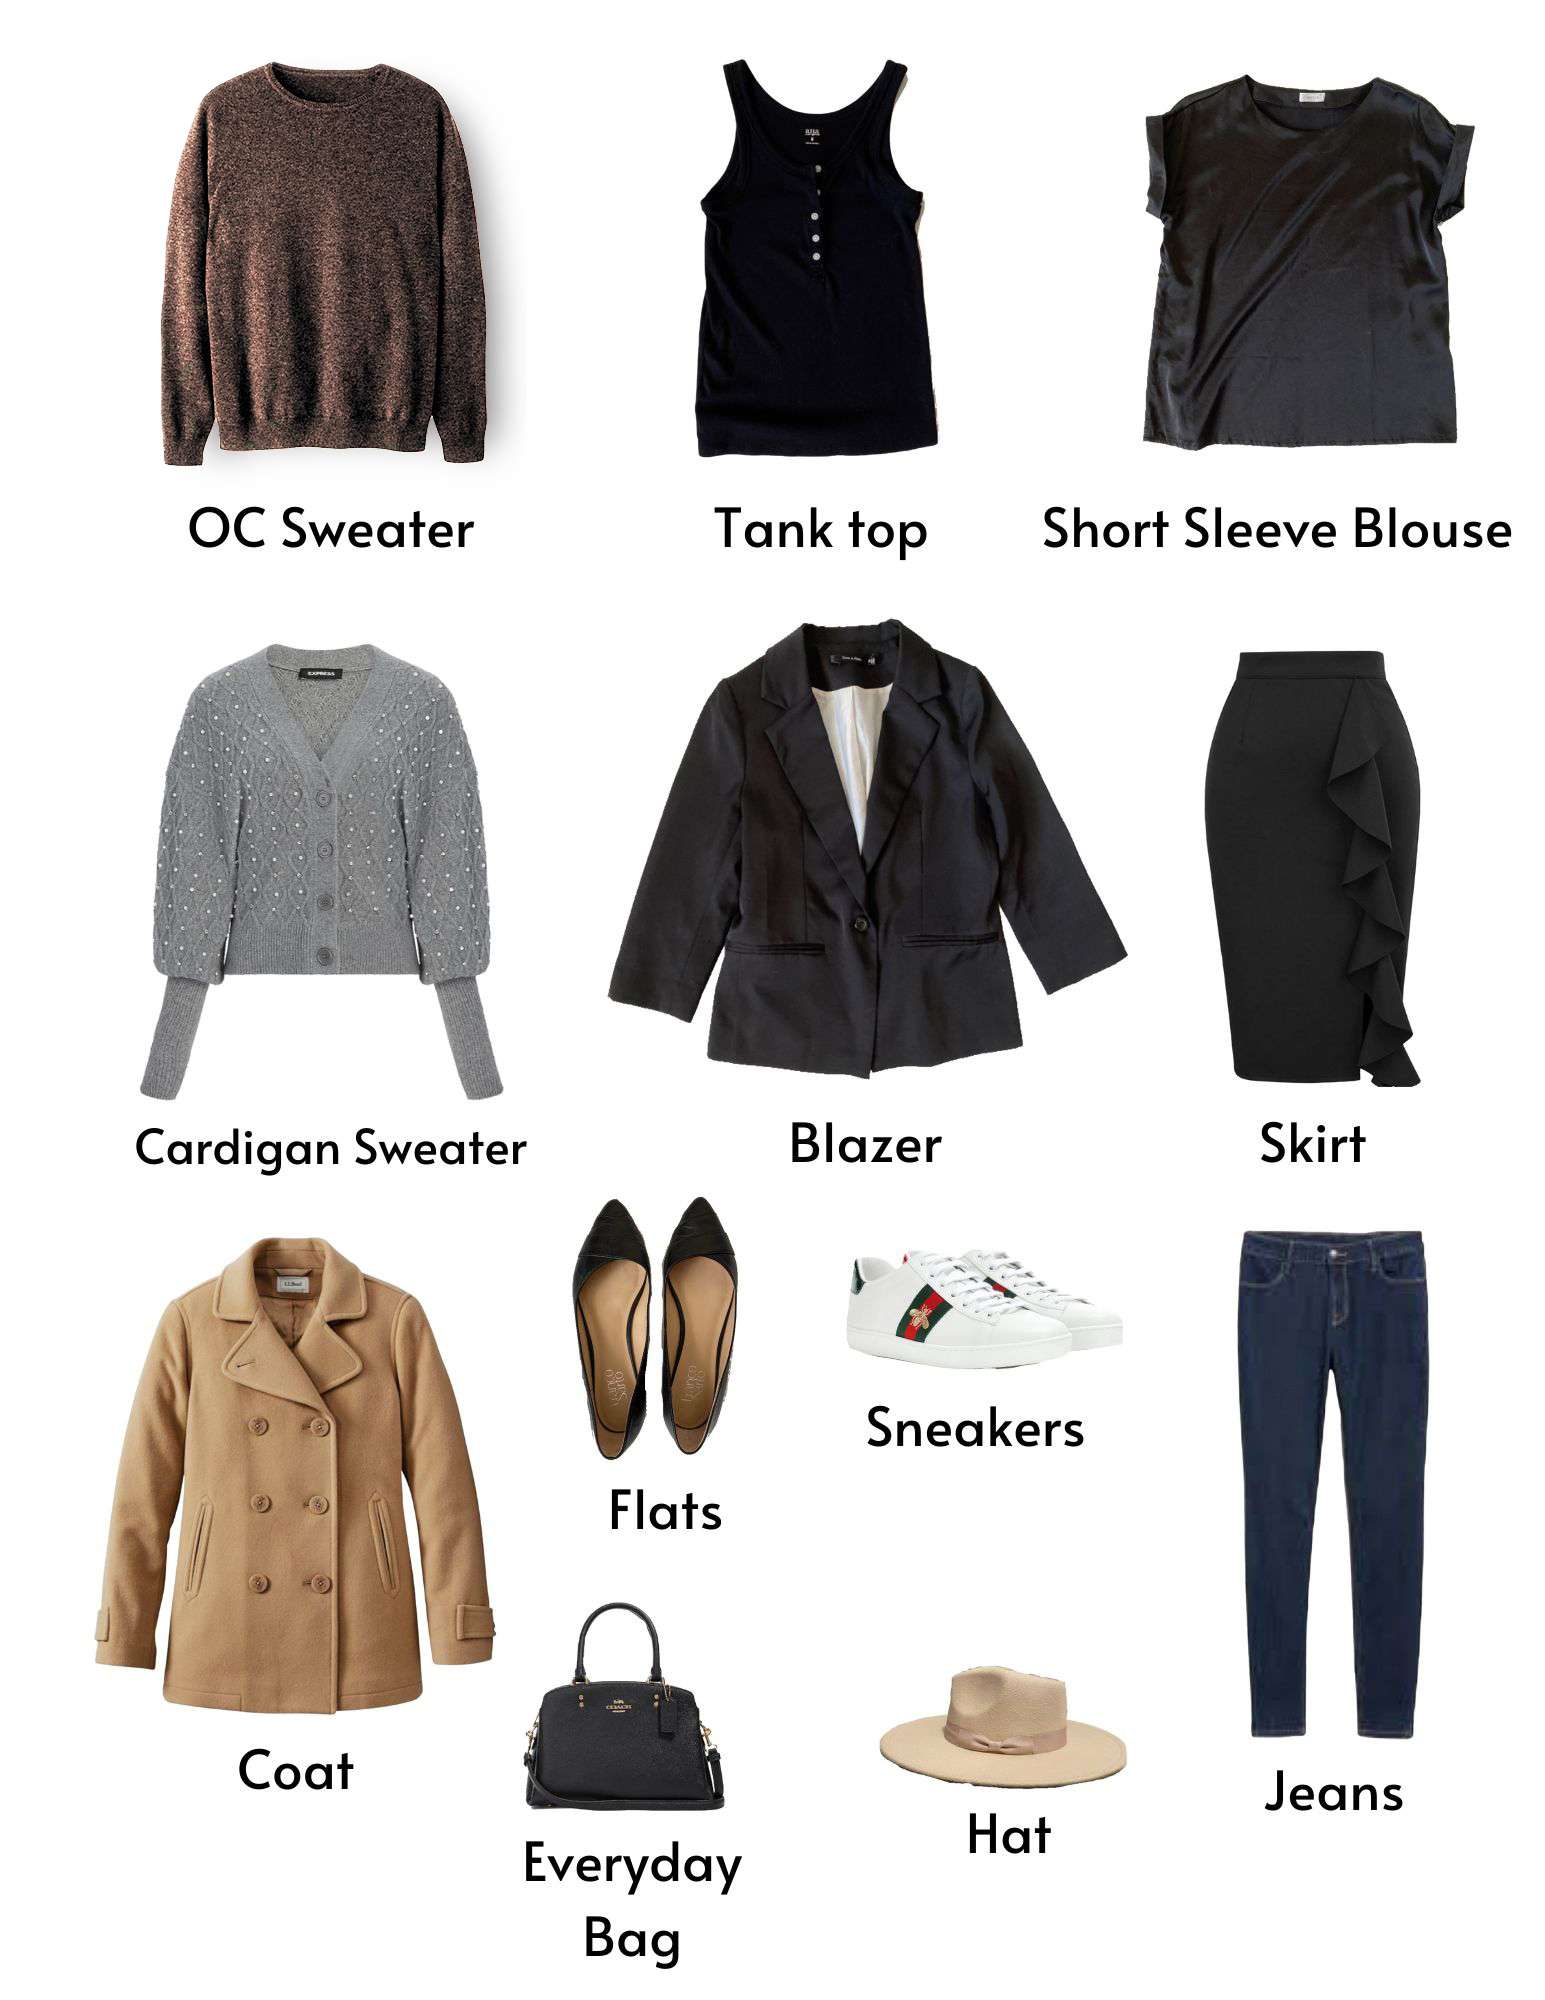 Oliver Charles - How Do You Start Building A Capsule Wardrobe?